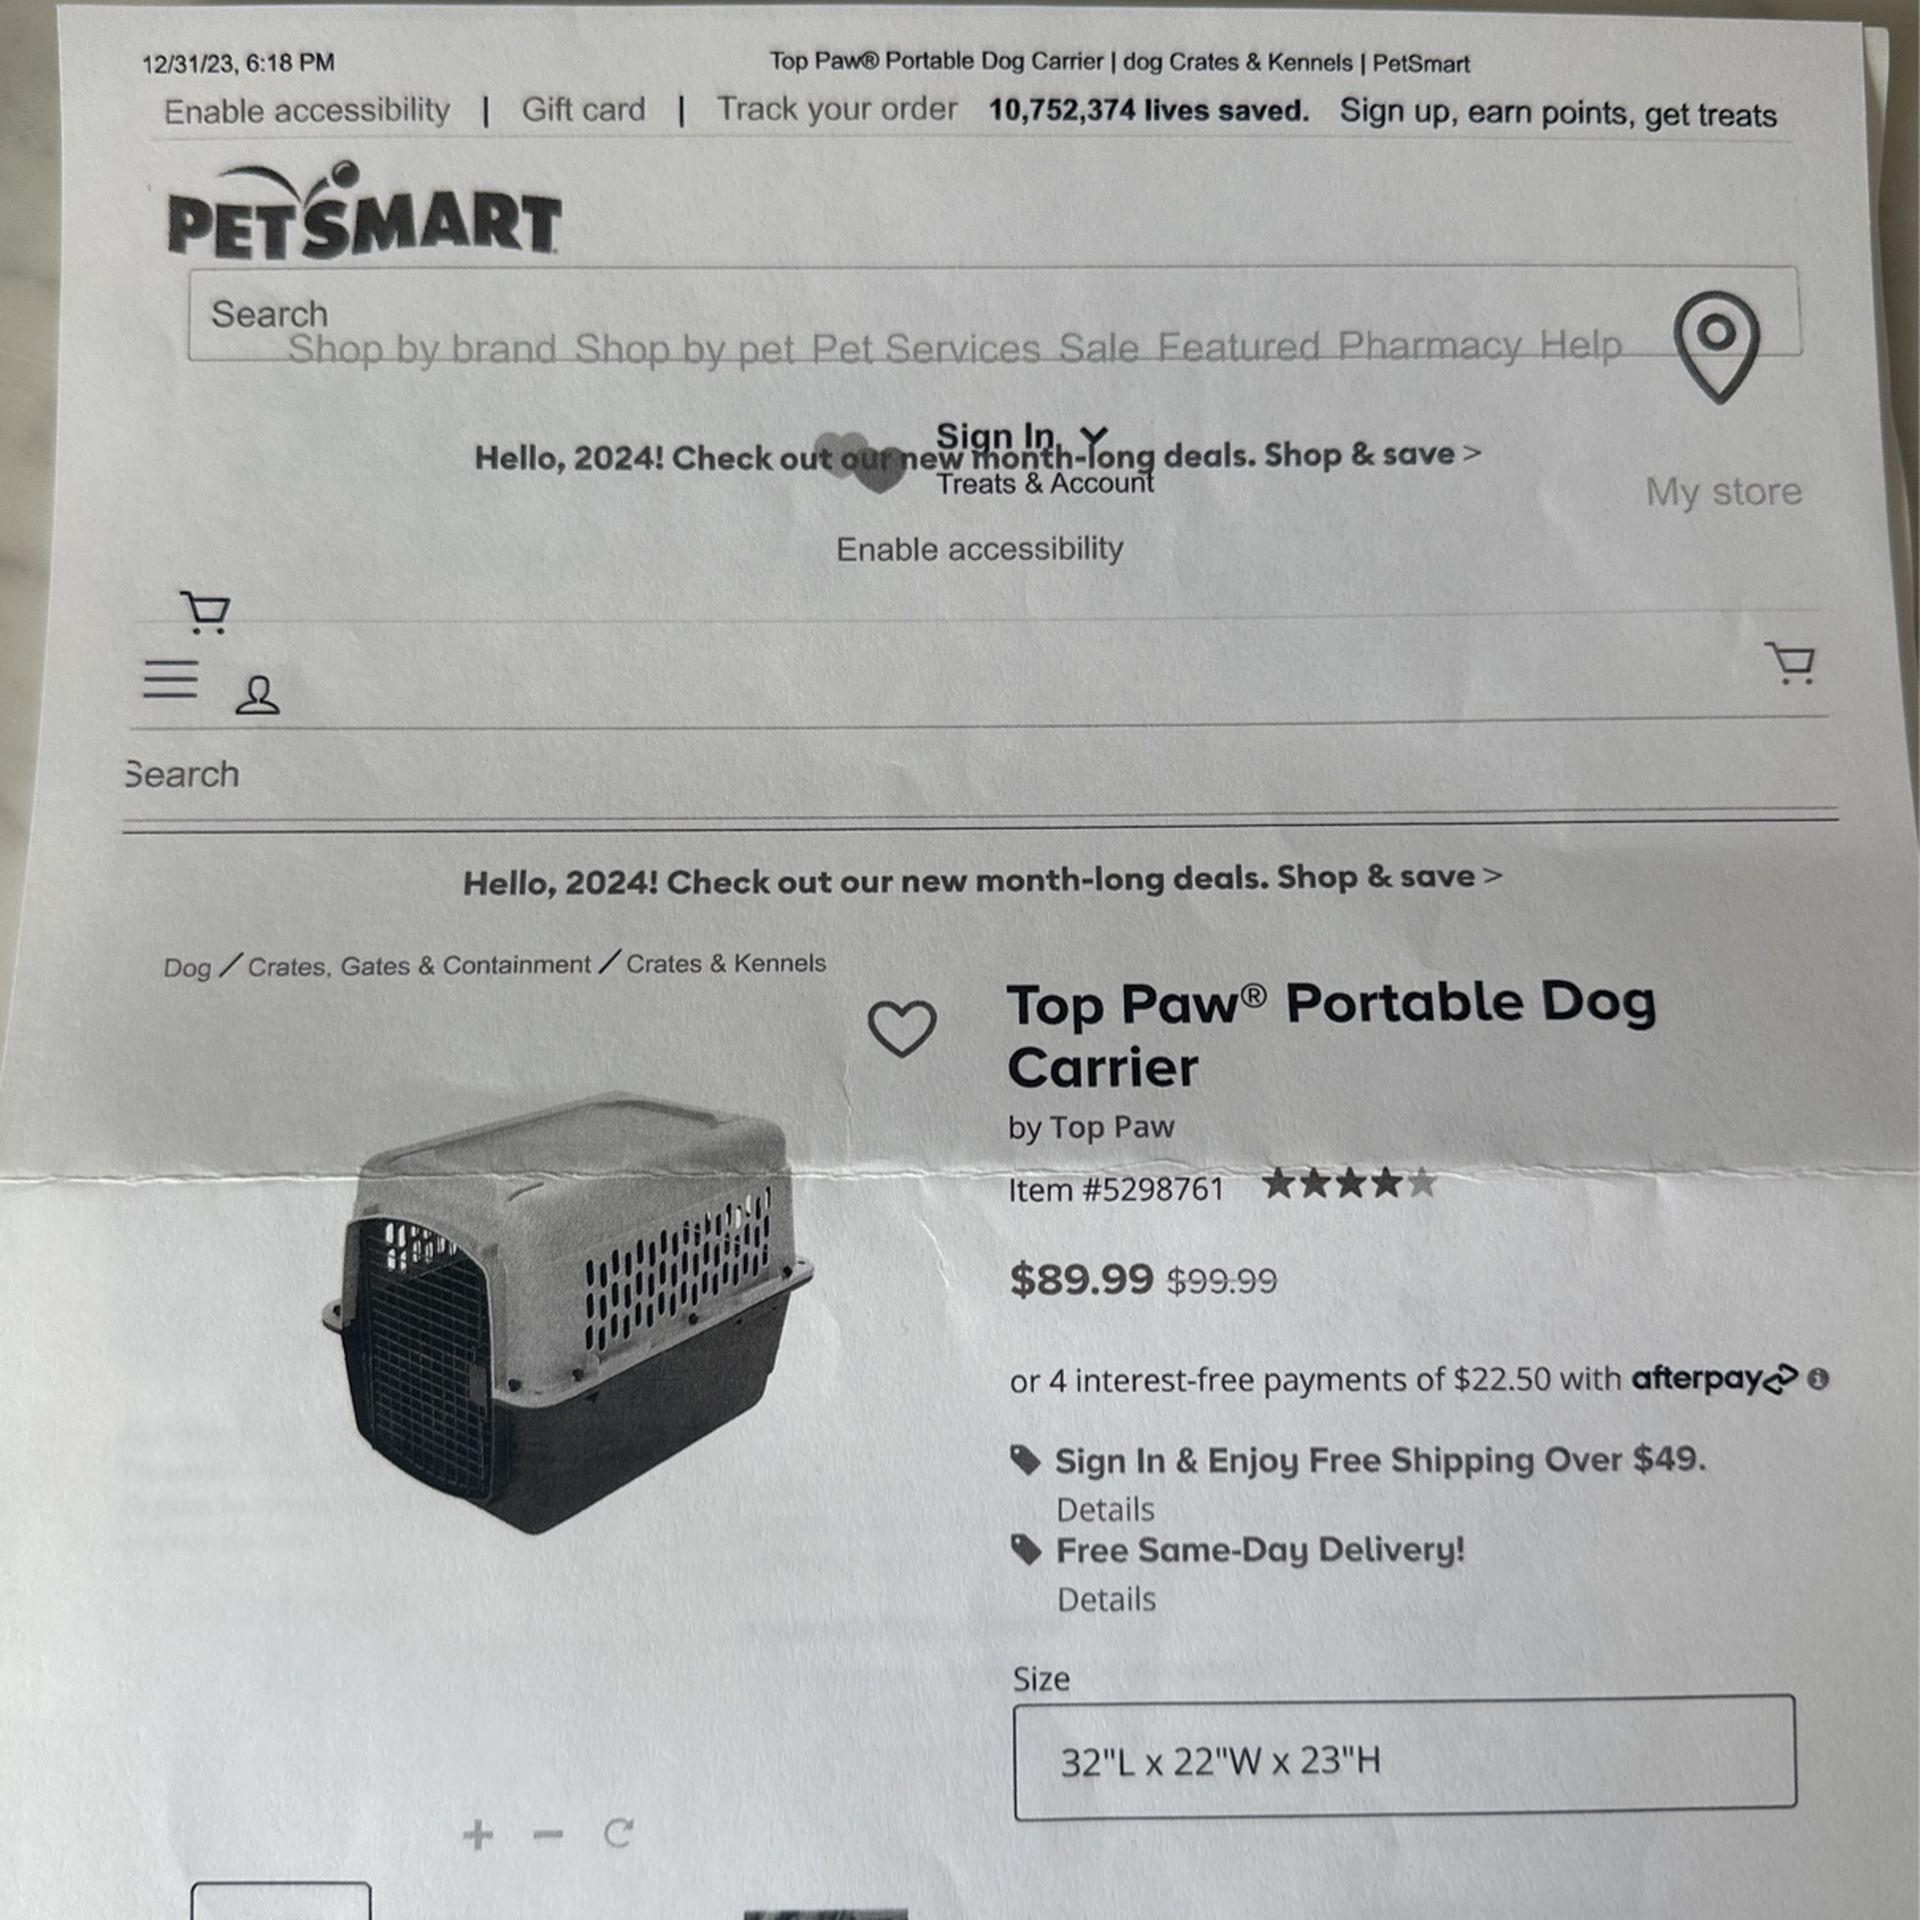 Top Paw portable dog Carrier